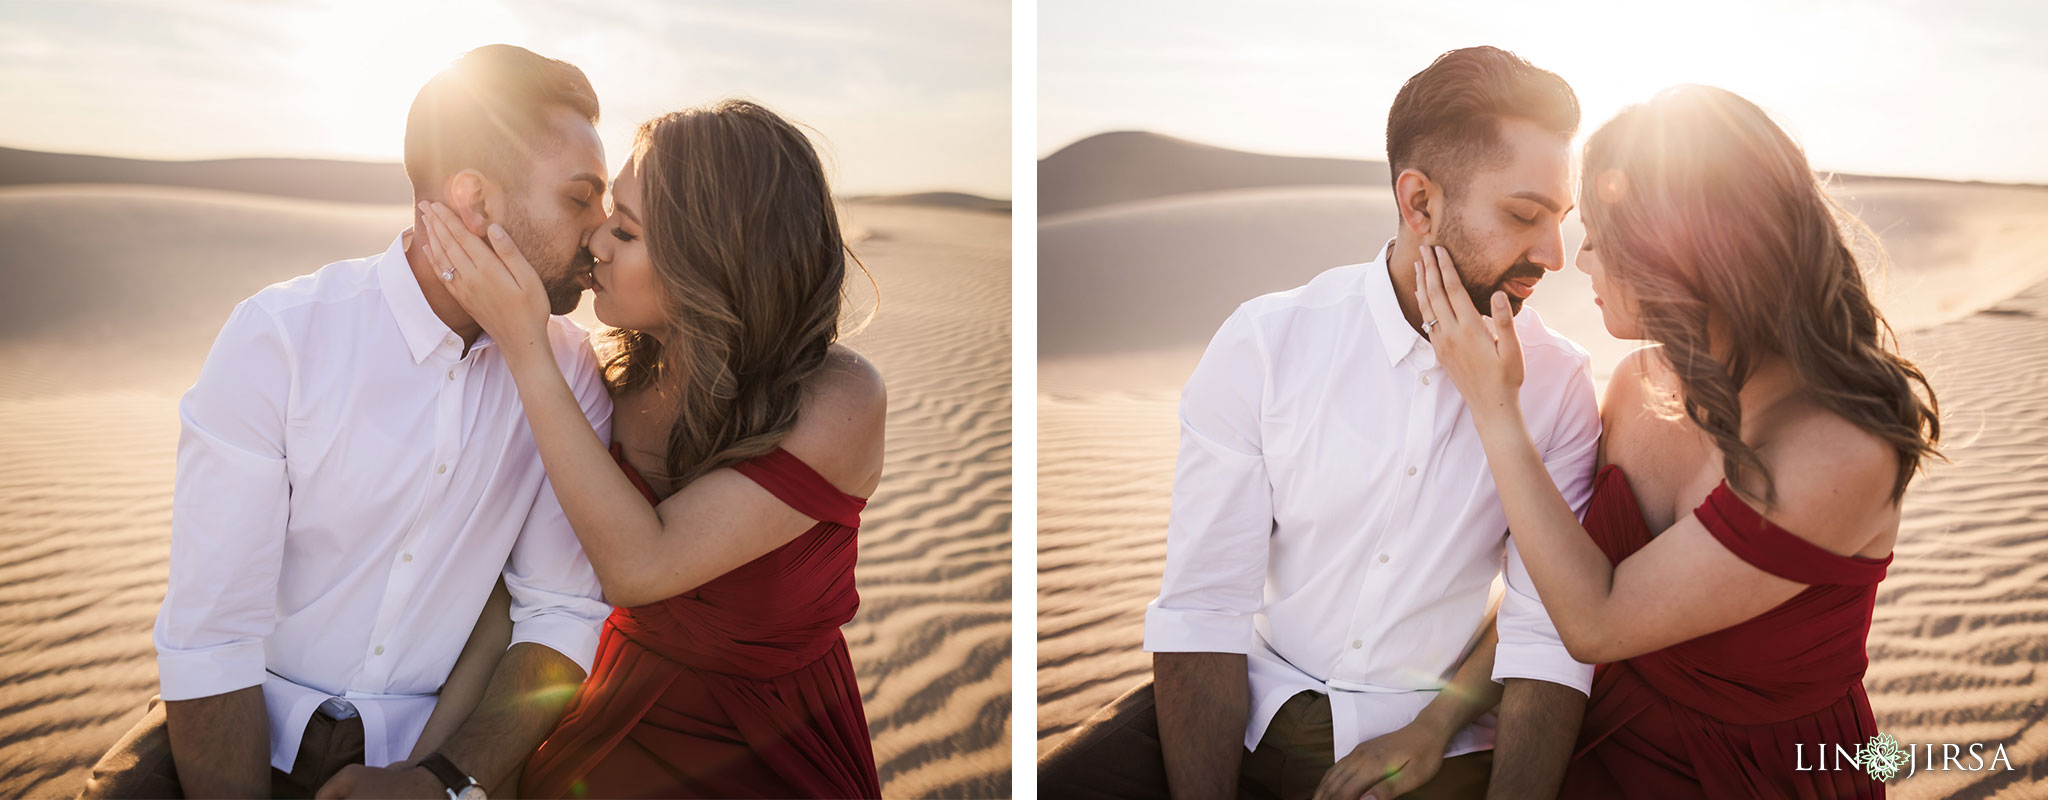 22 Imperial Sand Dunes Brawley Engagement Photography